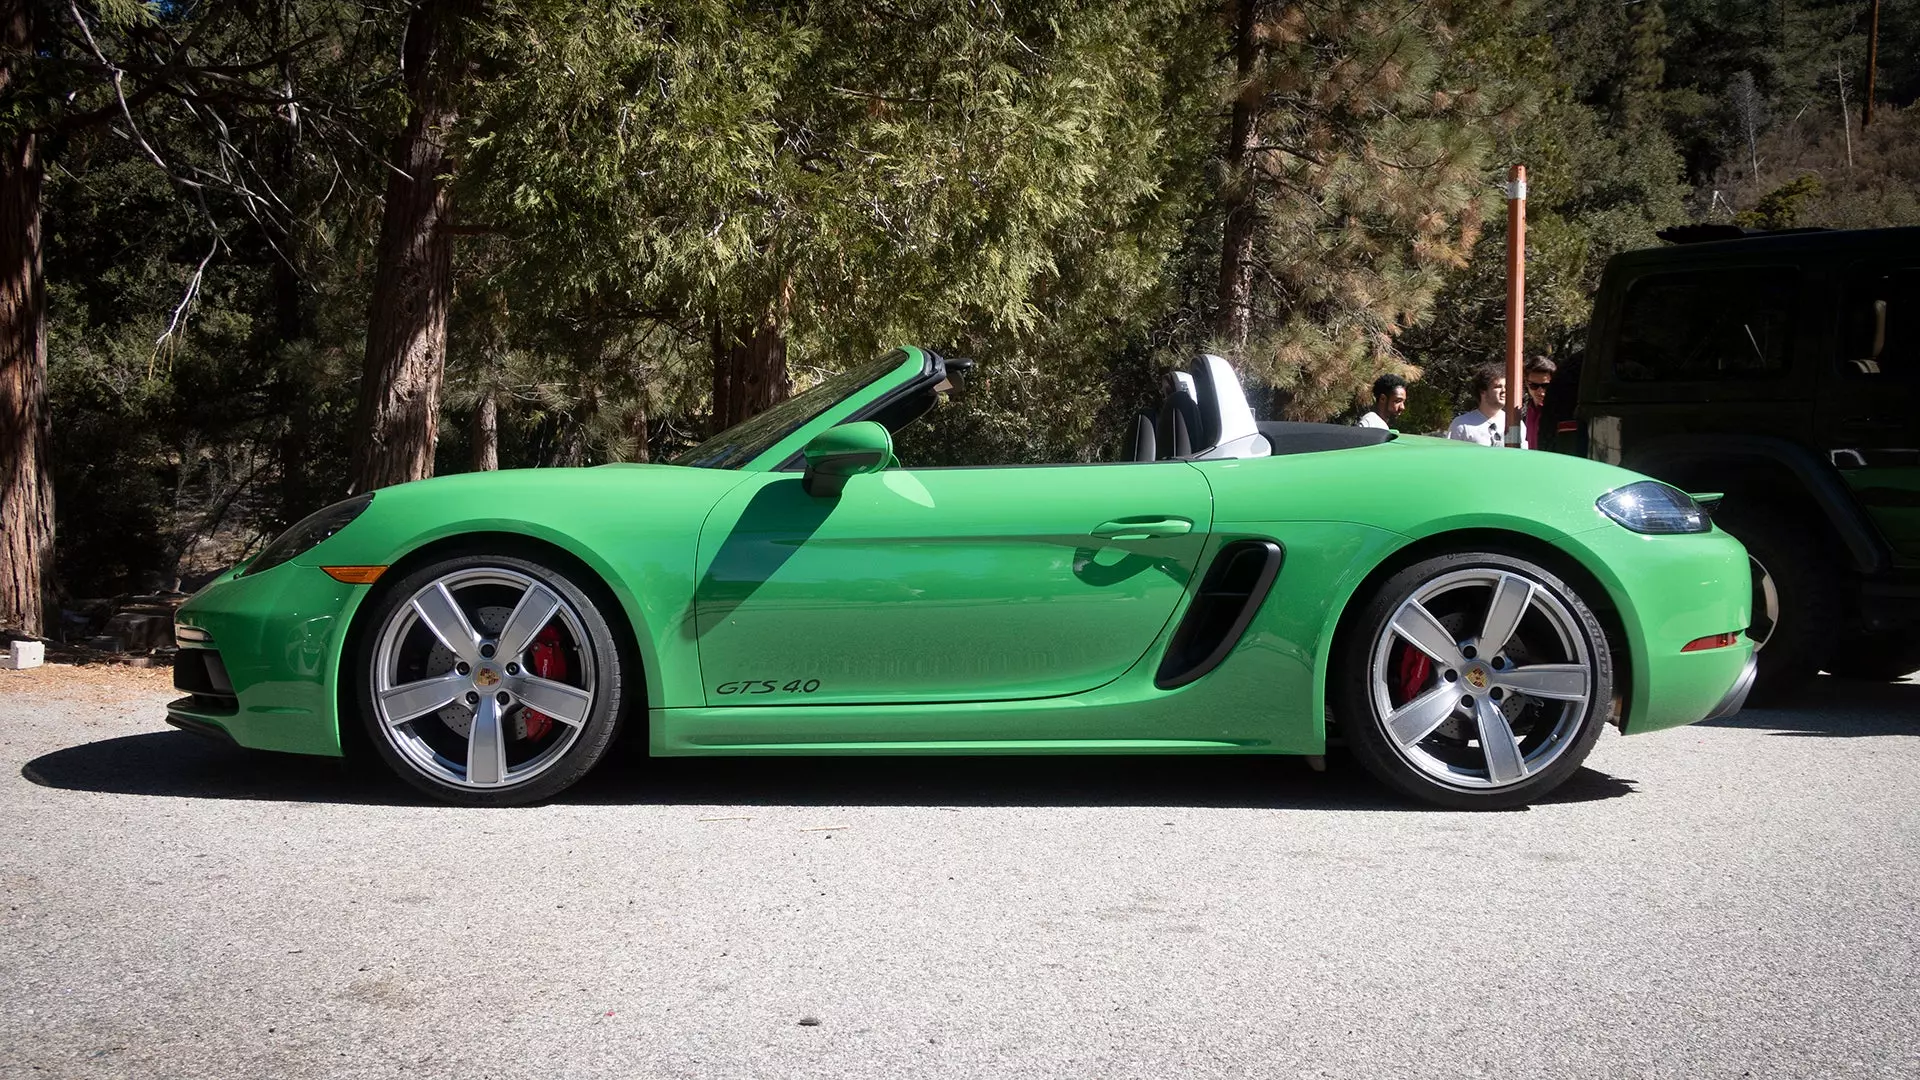 A Python Green Porsche Boxster Looks More Like a Frog Than a Snake but I’m Into It | Autance